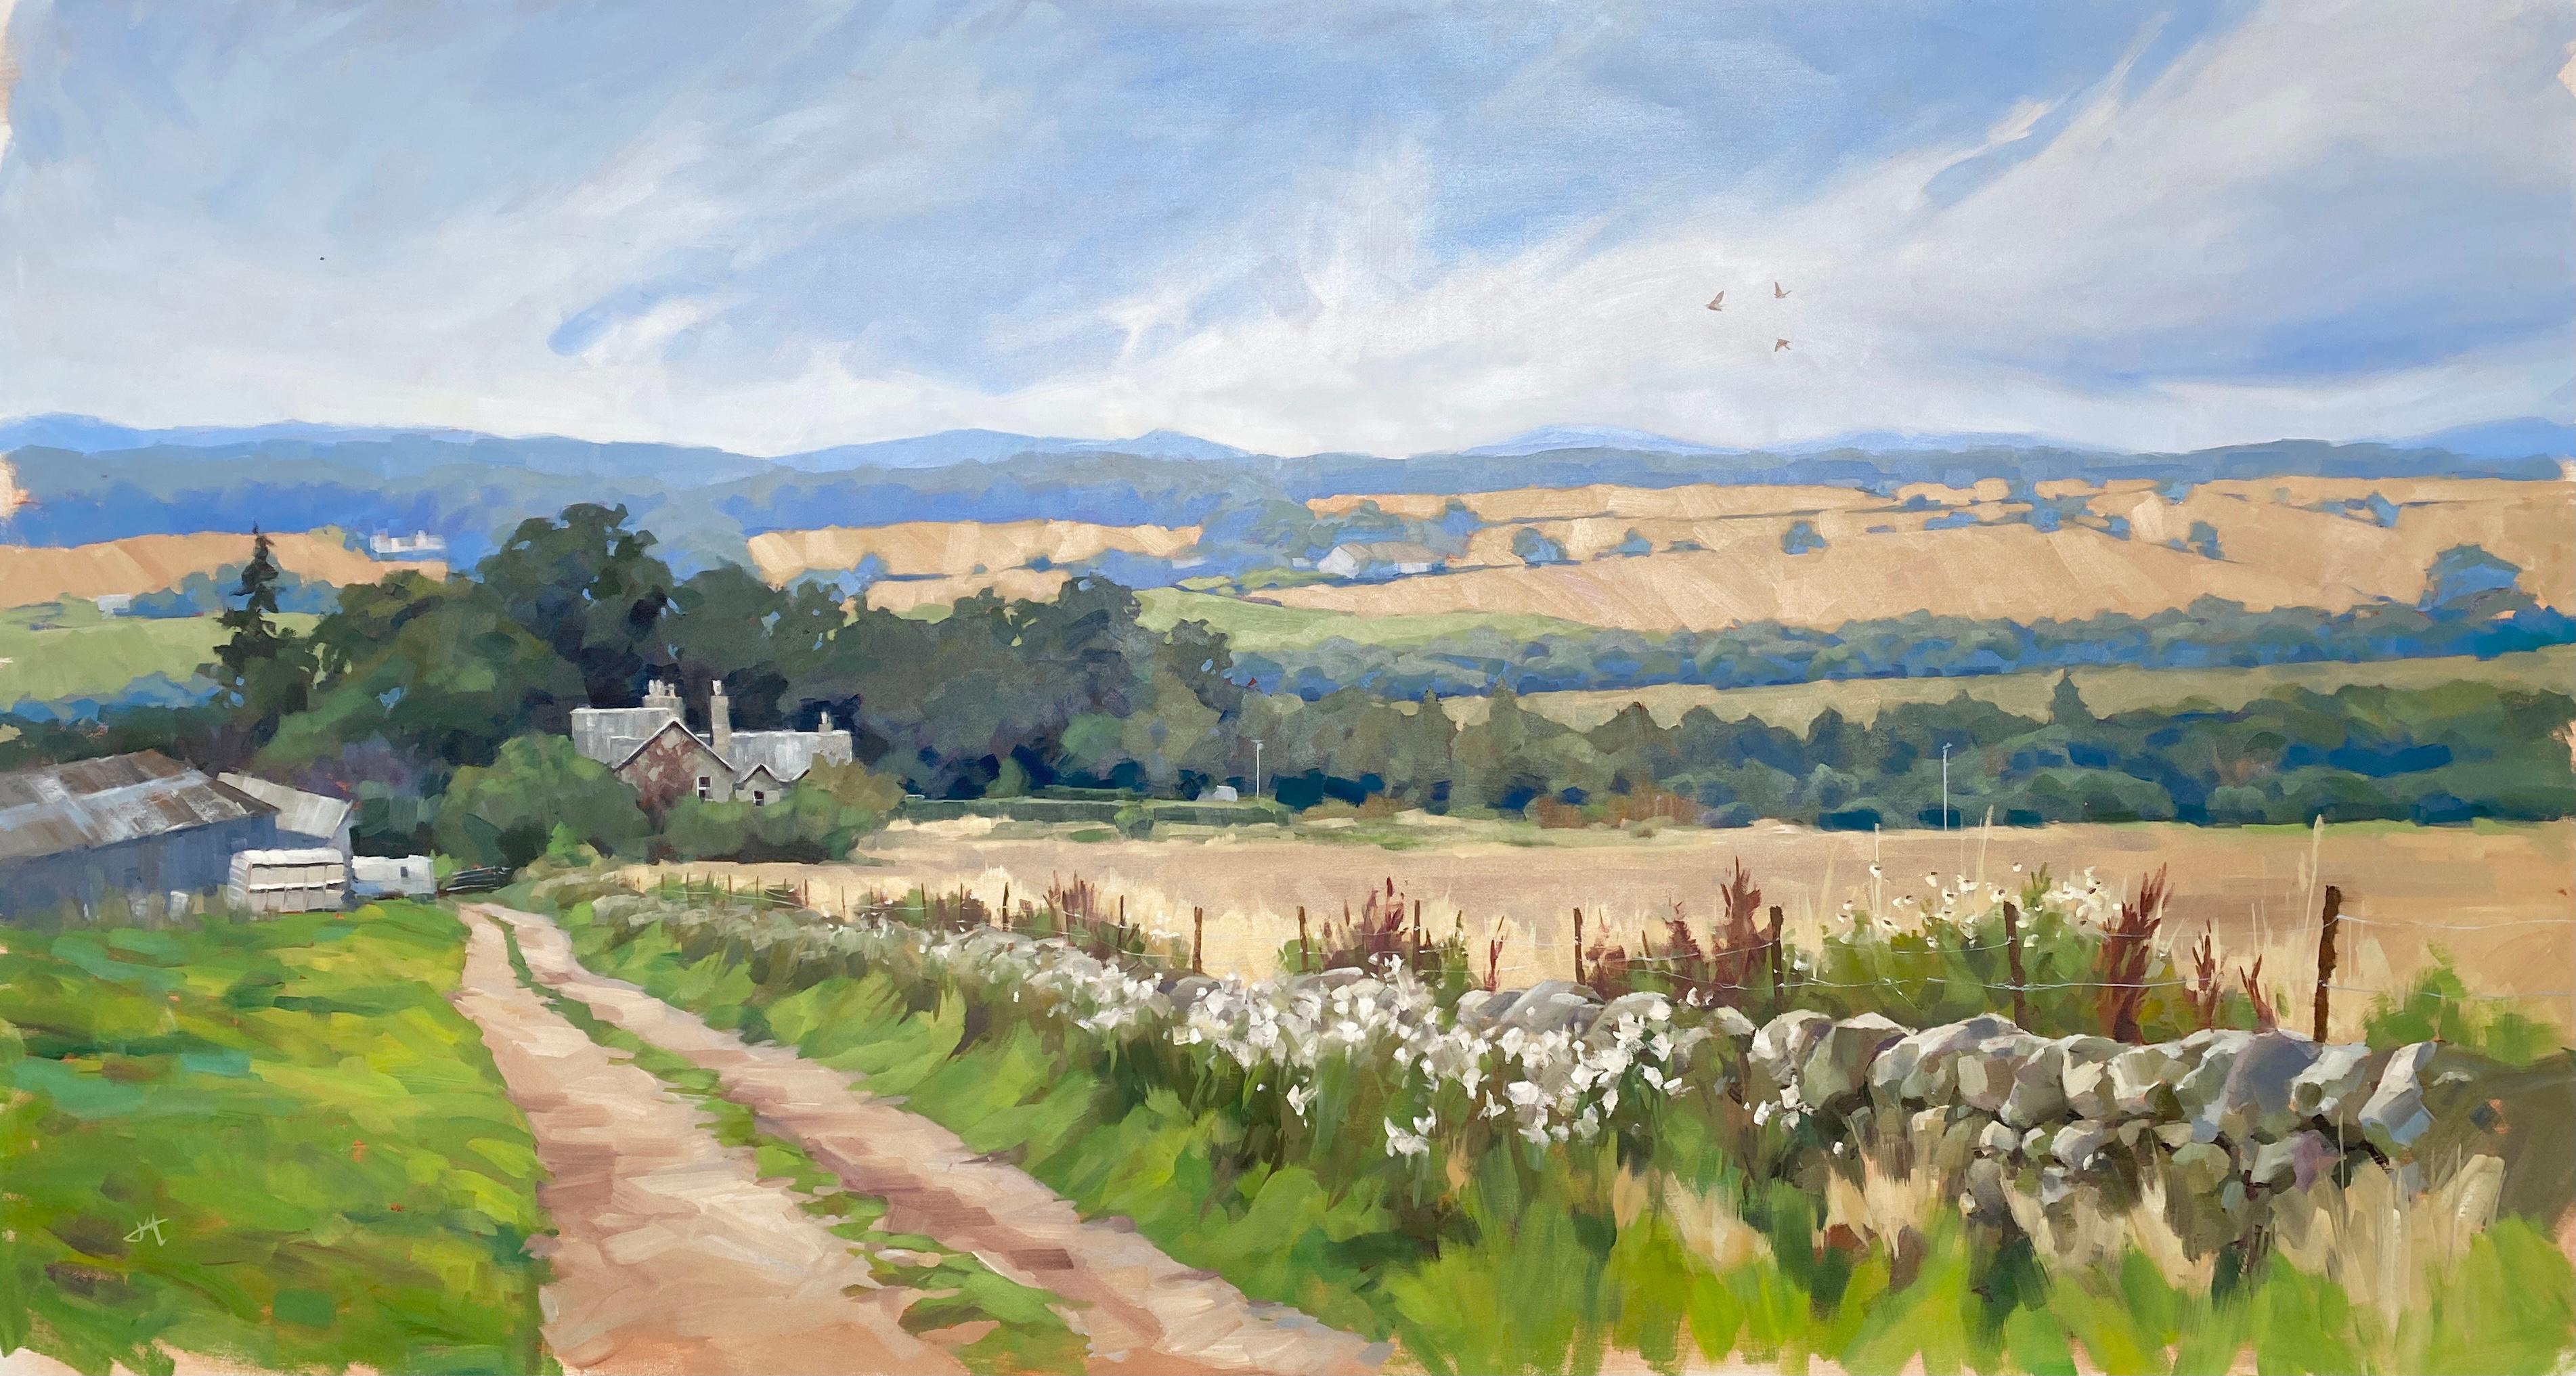 Judd Mercer Landscape Painting - "Down the Road, " Oil painting